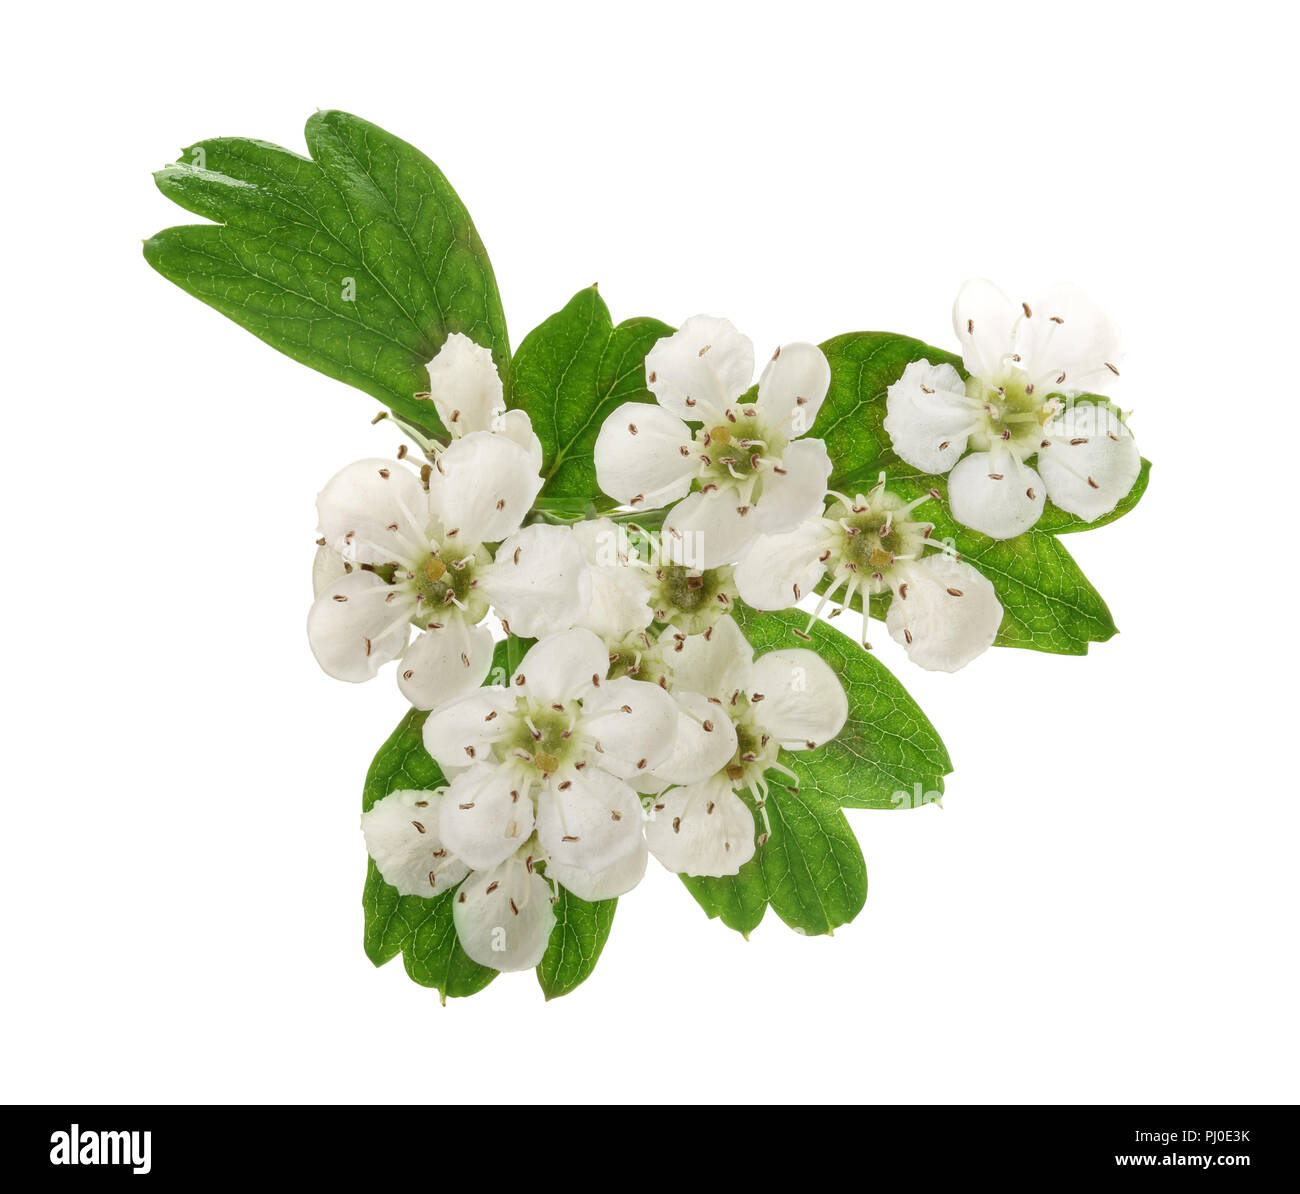 Hawthorn or Crataegus monogyna branch with flowers isolated on a white background Stock Photo